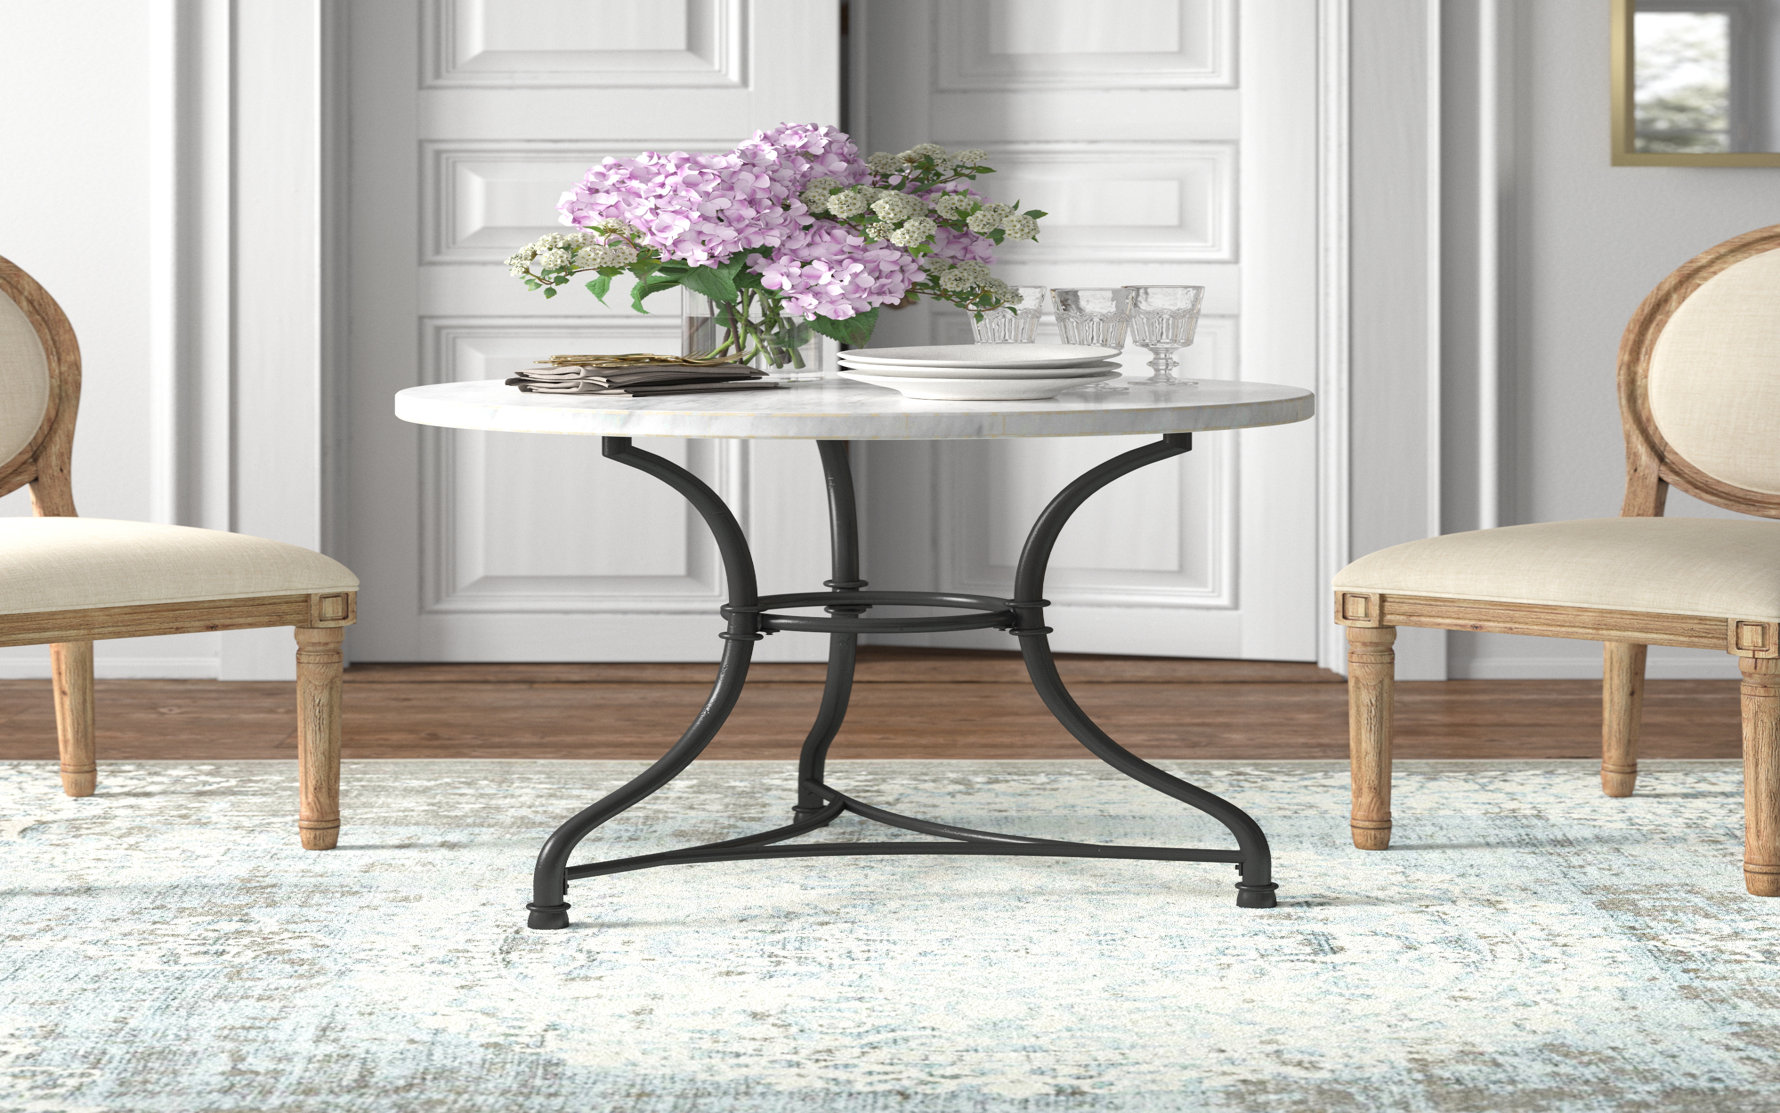 Best Rated Dining Tables & Sets for Small Spaces